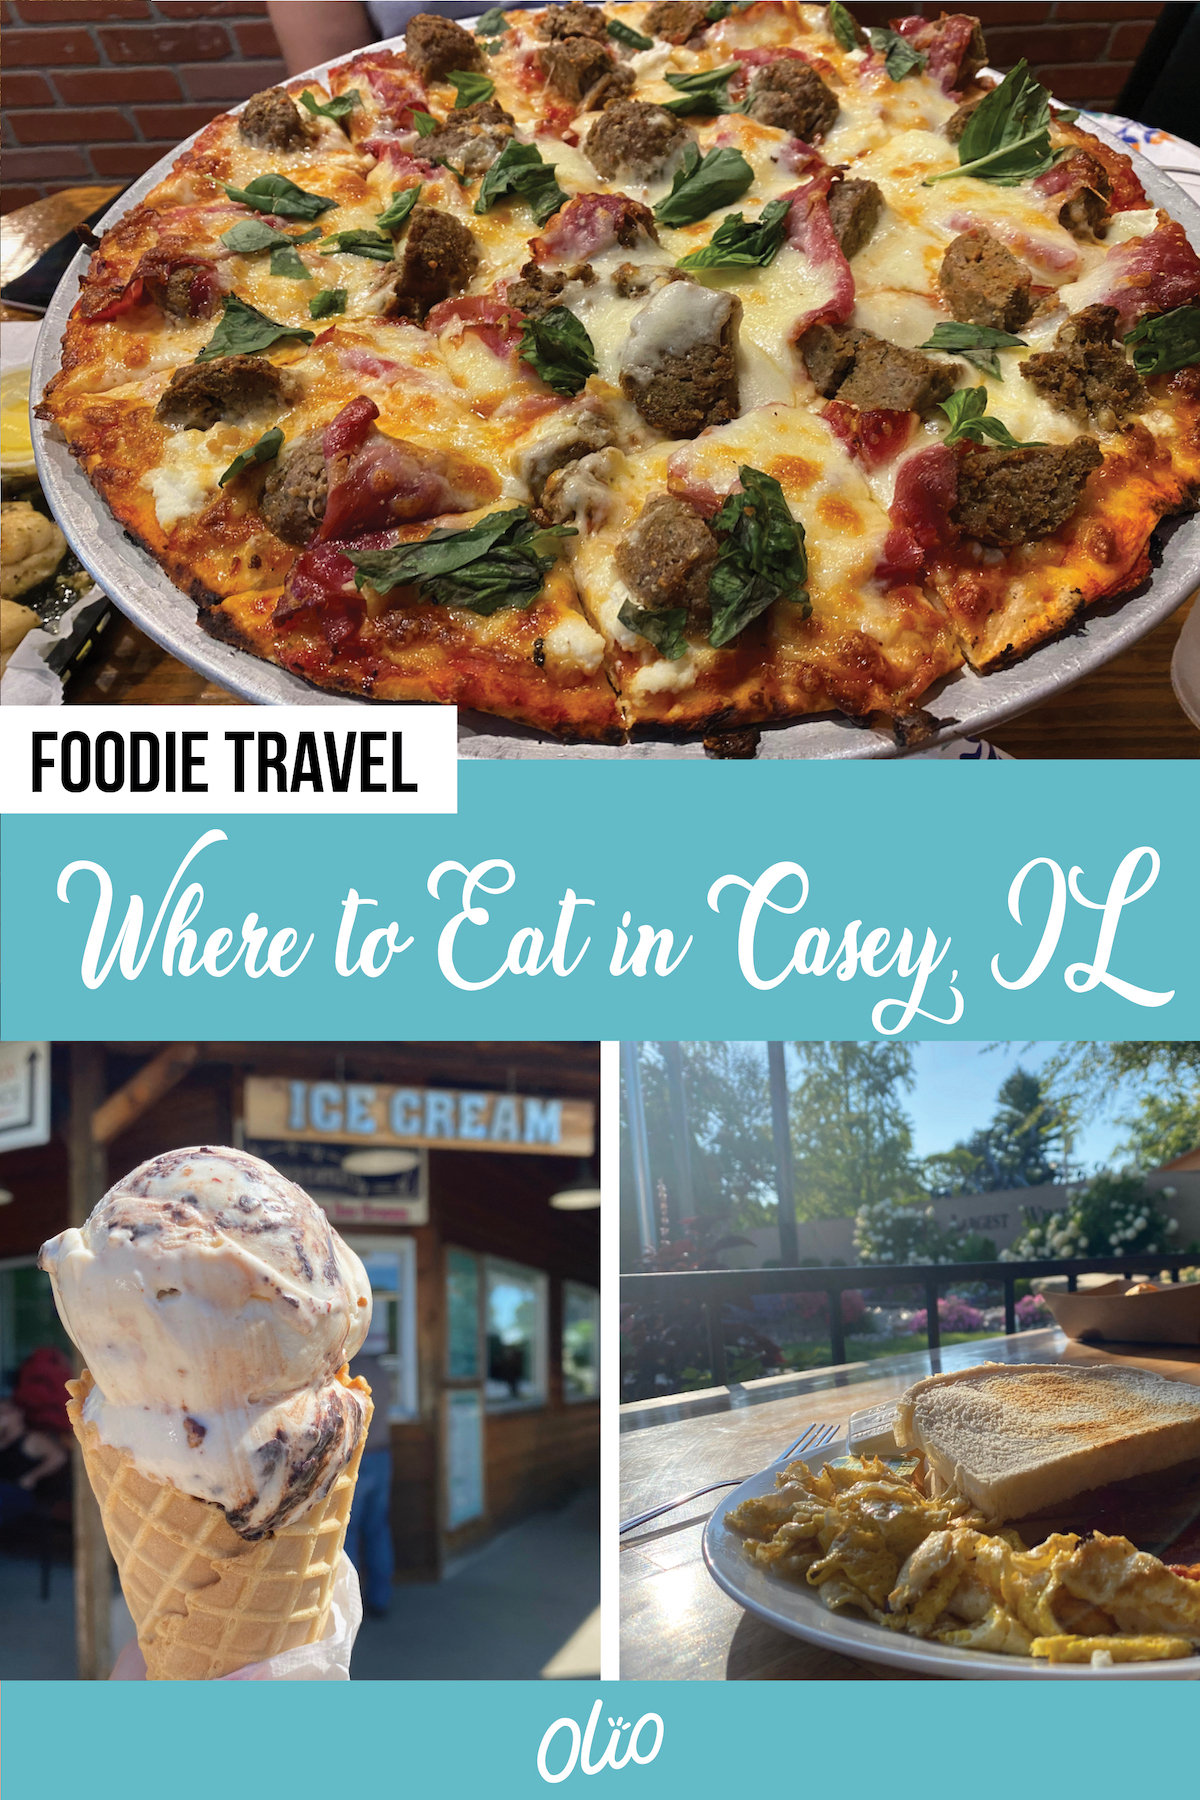 There are lots of amazing places to eat in Casey, Illinois! From hearty American fare and Chicago-style pizza to unbelievable giant pretzels and homemade ice cream, there's something for every taste in this small town.